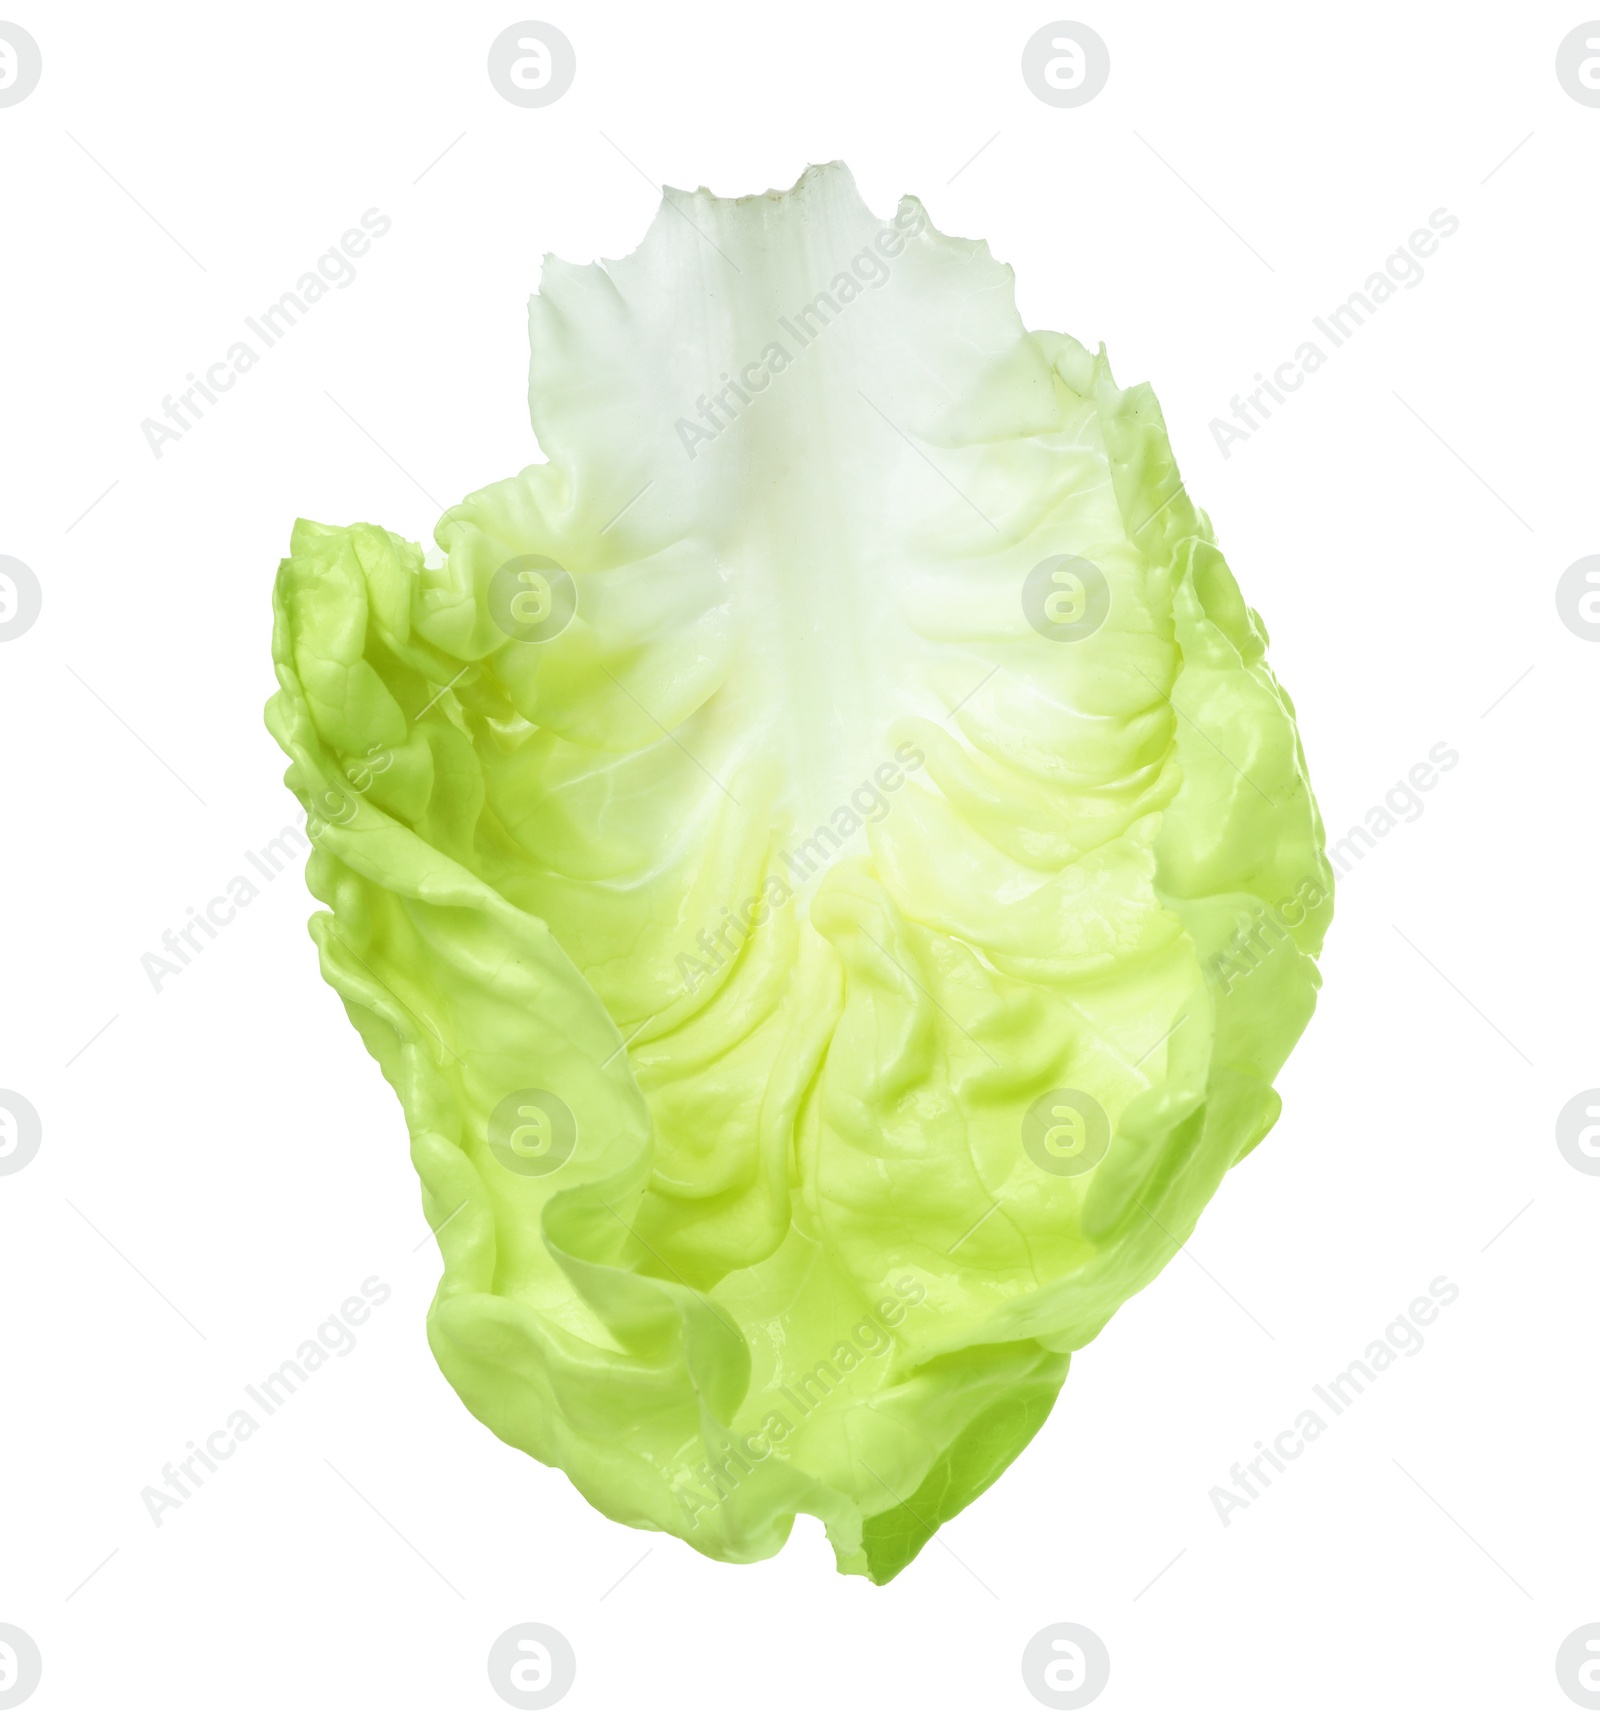 Photo of Fresh leaf of butter lettuce isolated on white